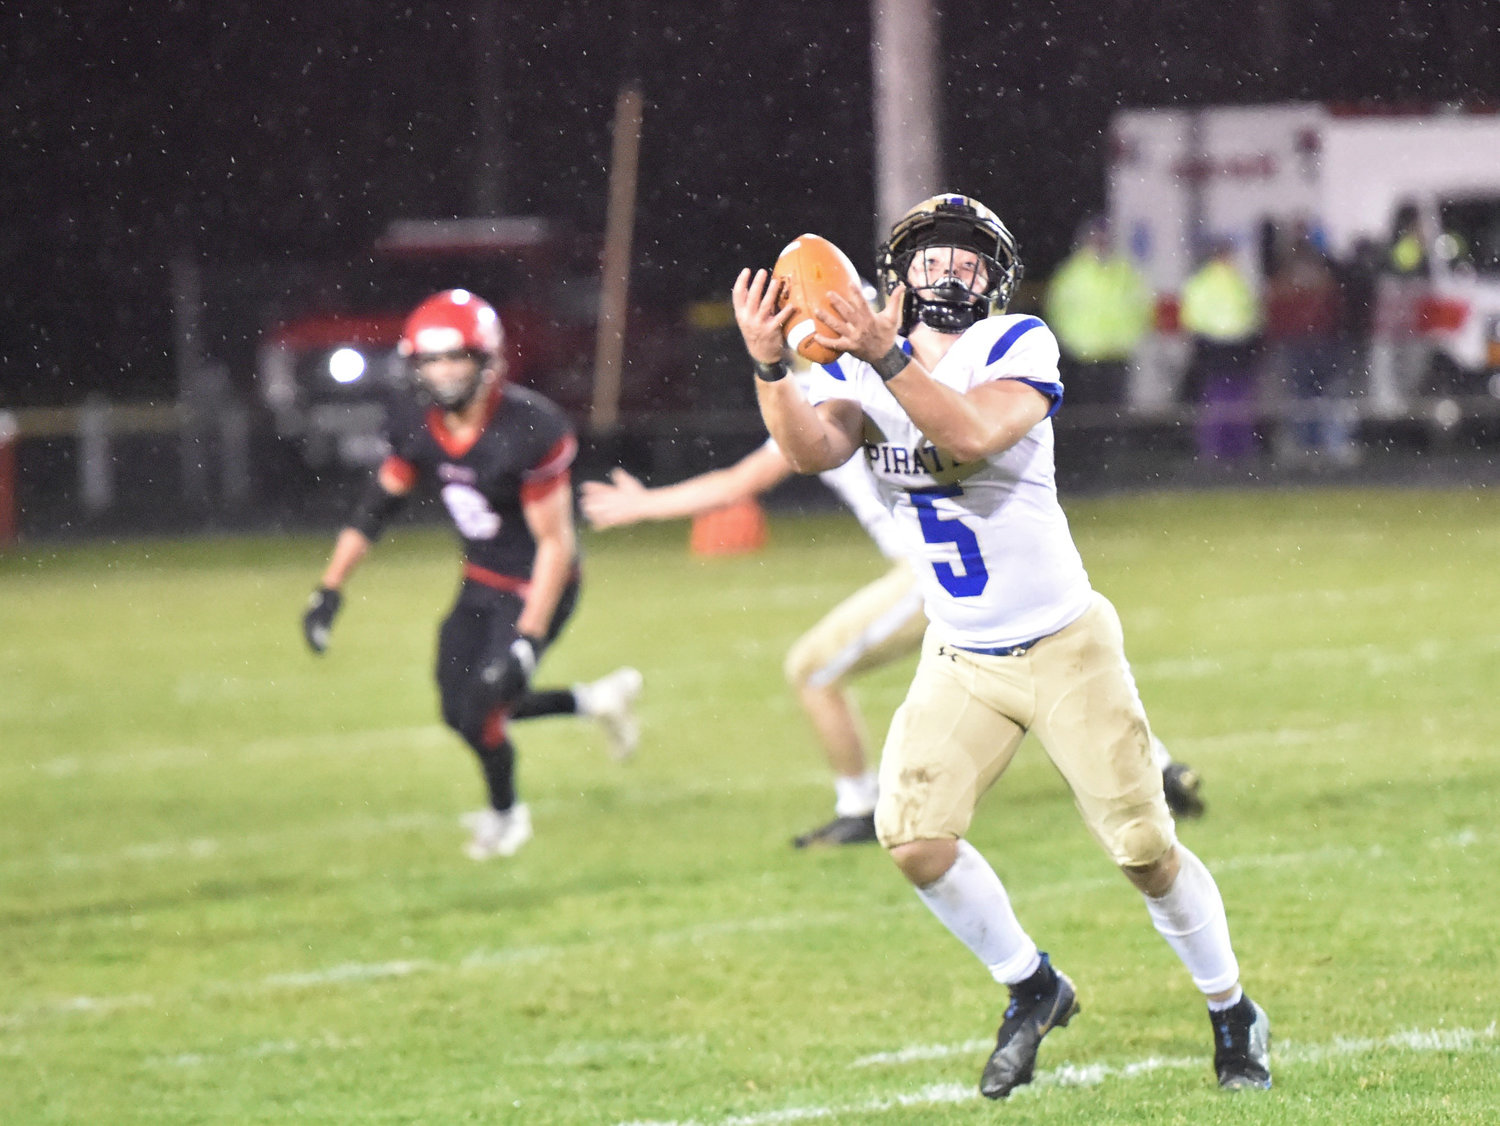 Adna’s Jaxon Dunnagan catches a pass before turning up field against Wahkiakum on Monday, Nov. 1, in Cathlamet.